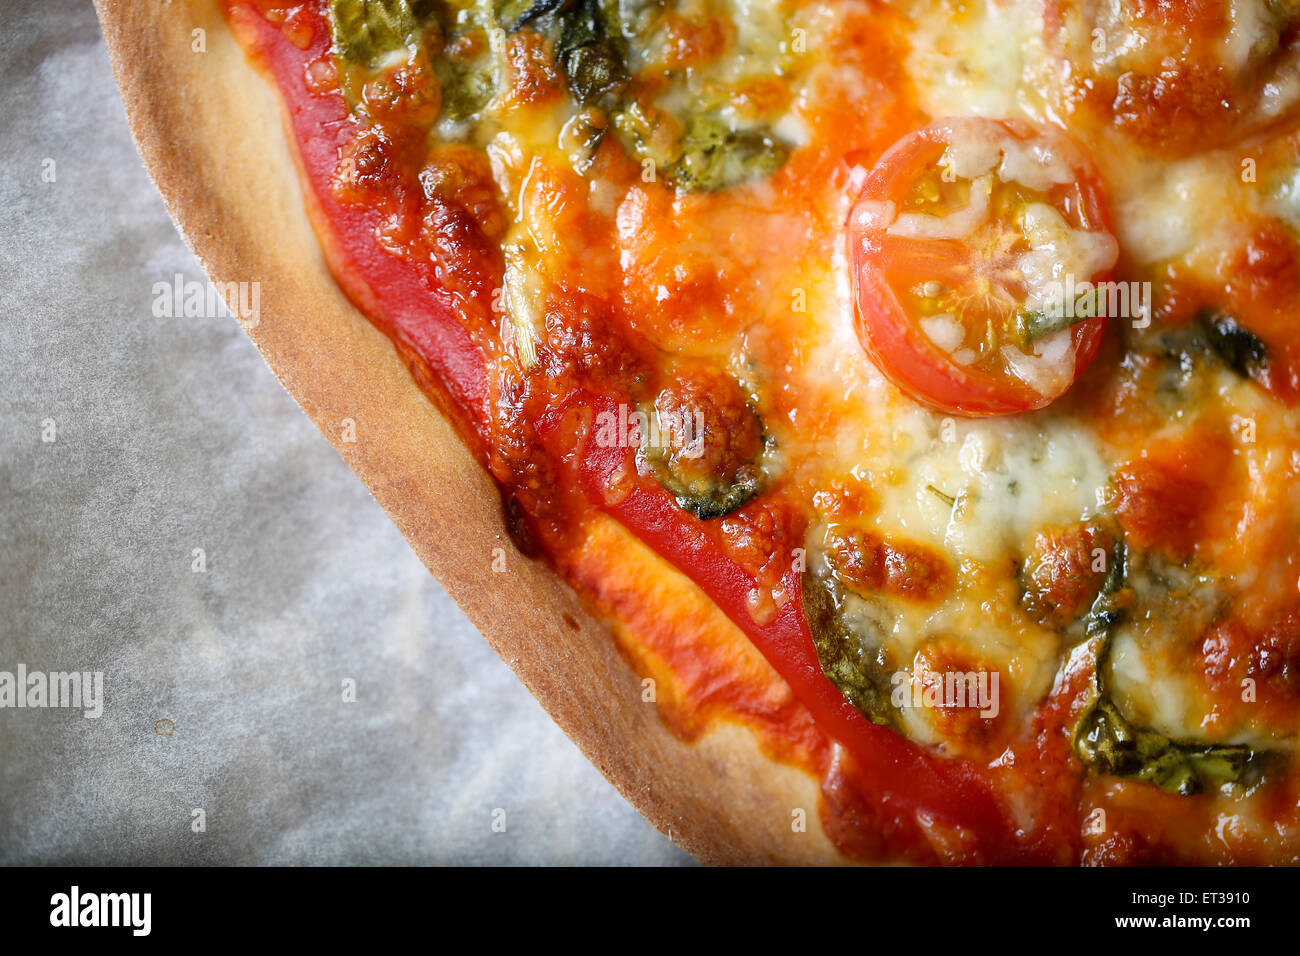 Traditional home made thin crust pizza with spinach, tomato, and mozzarella Stock Photo